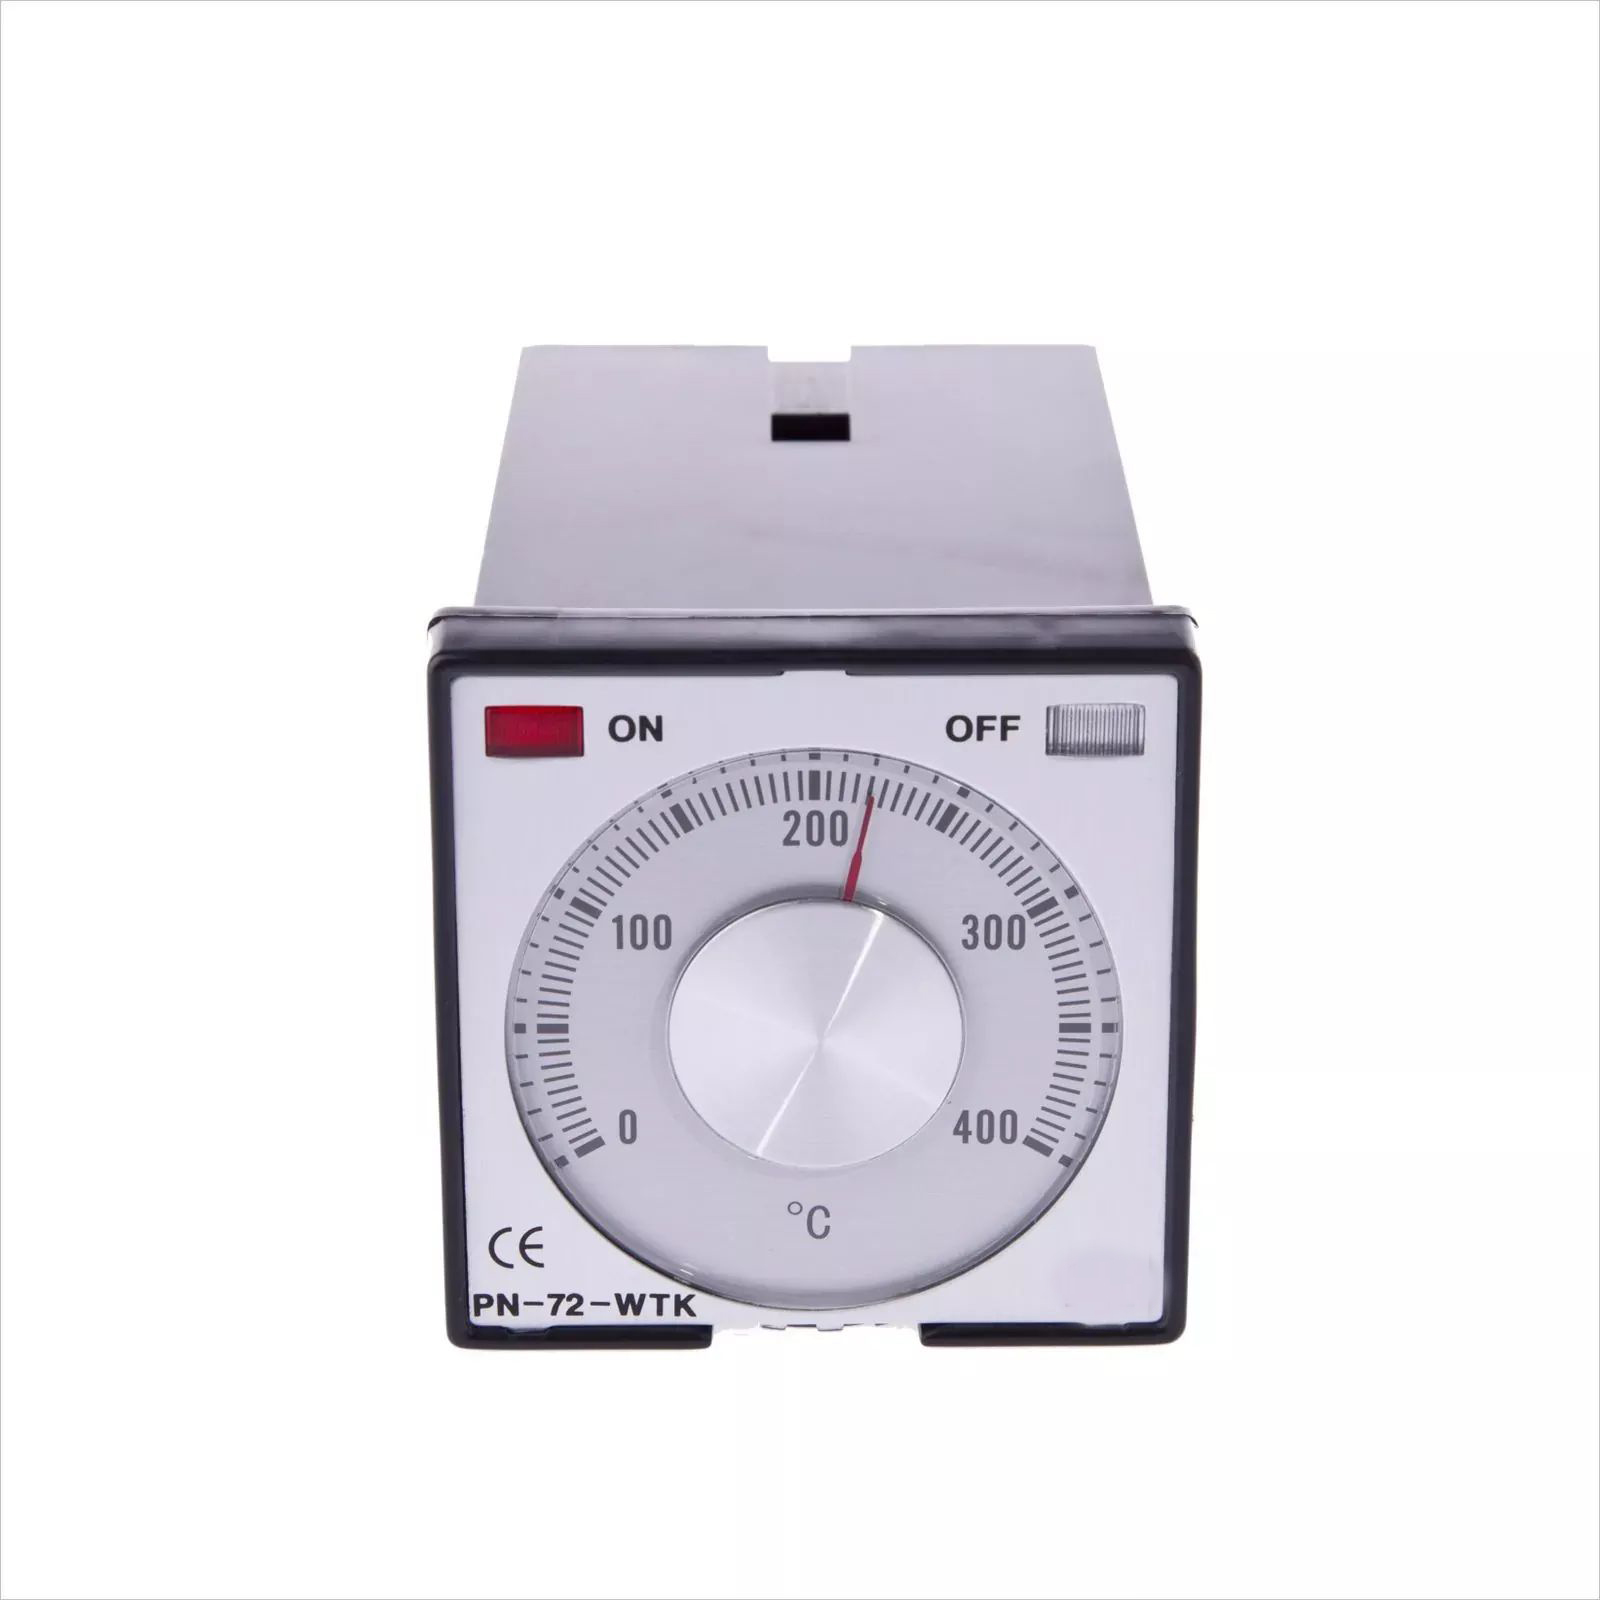 PN-72 multifunction digital panel meter with pointer For industrial machinery